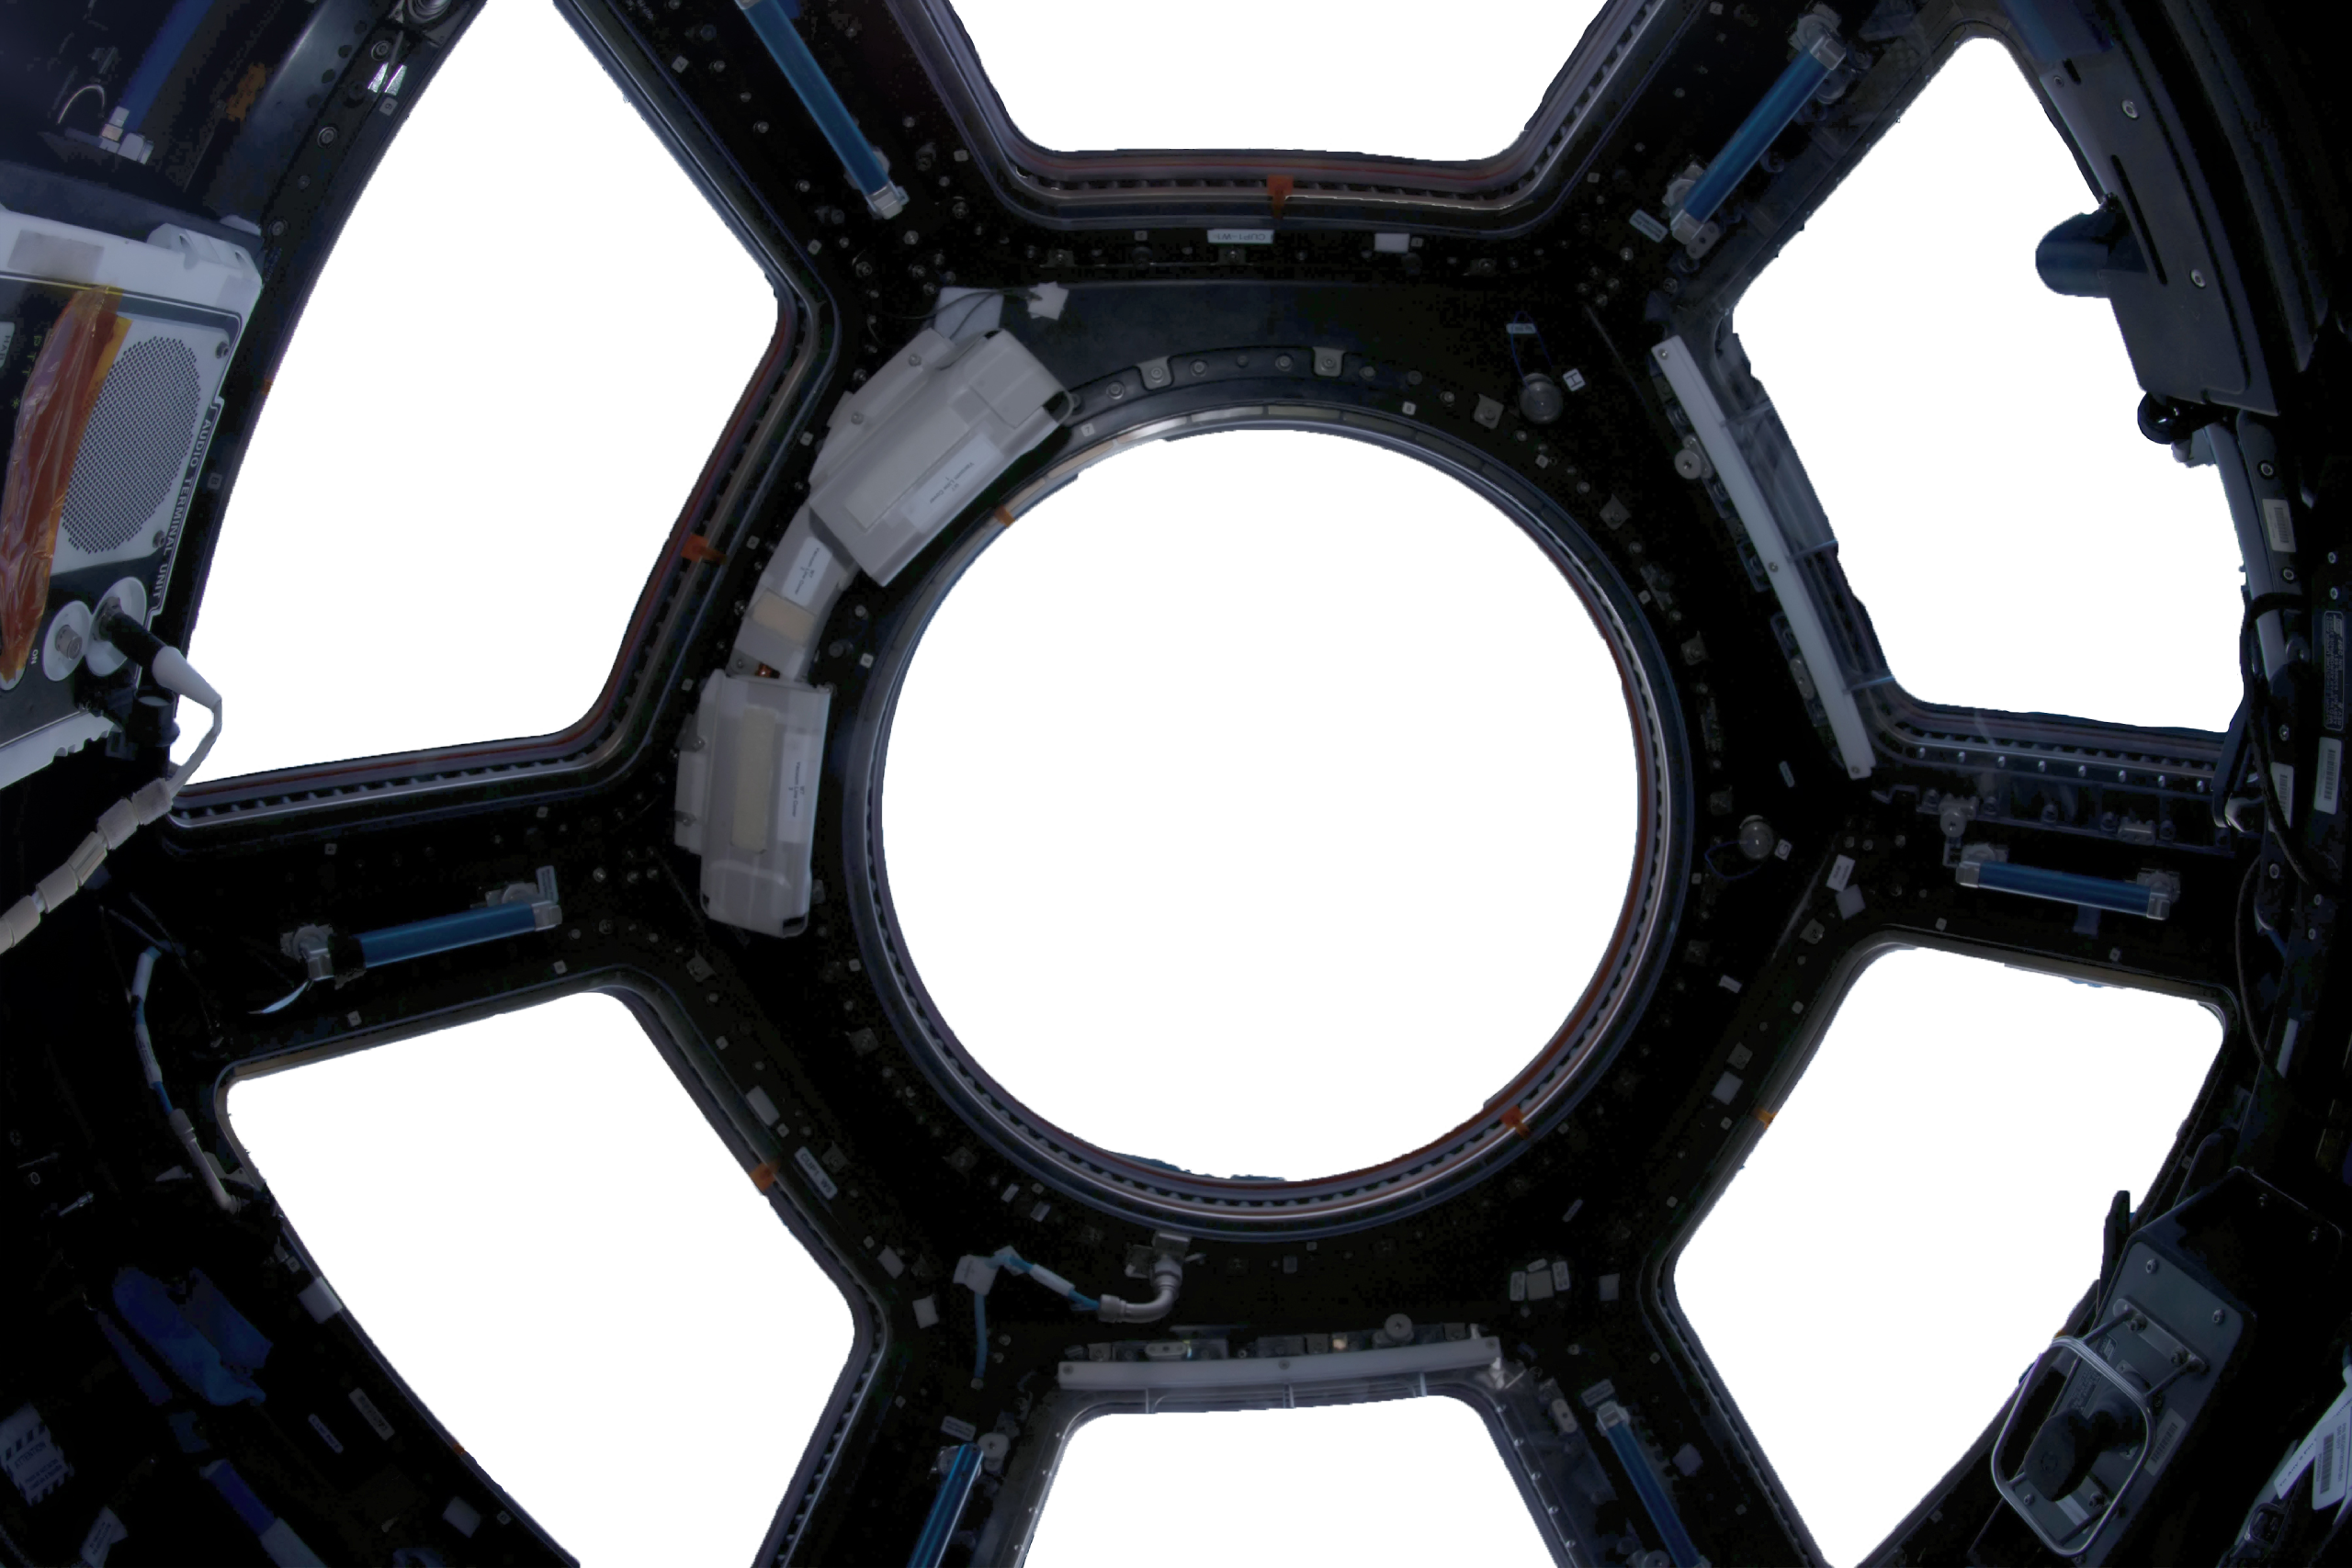 Space station window